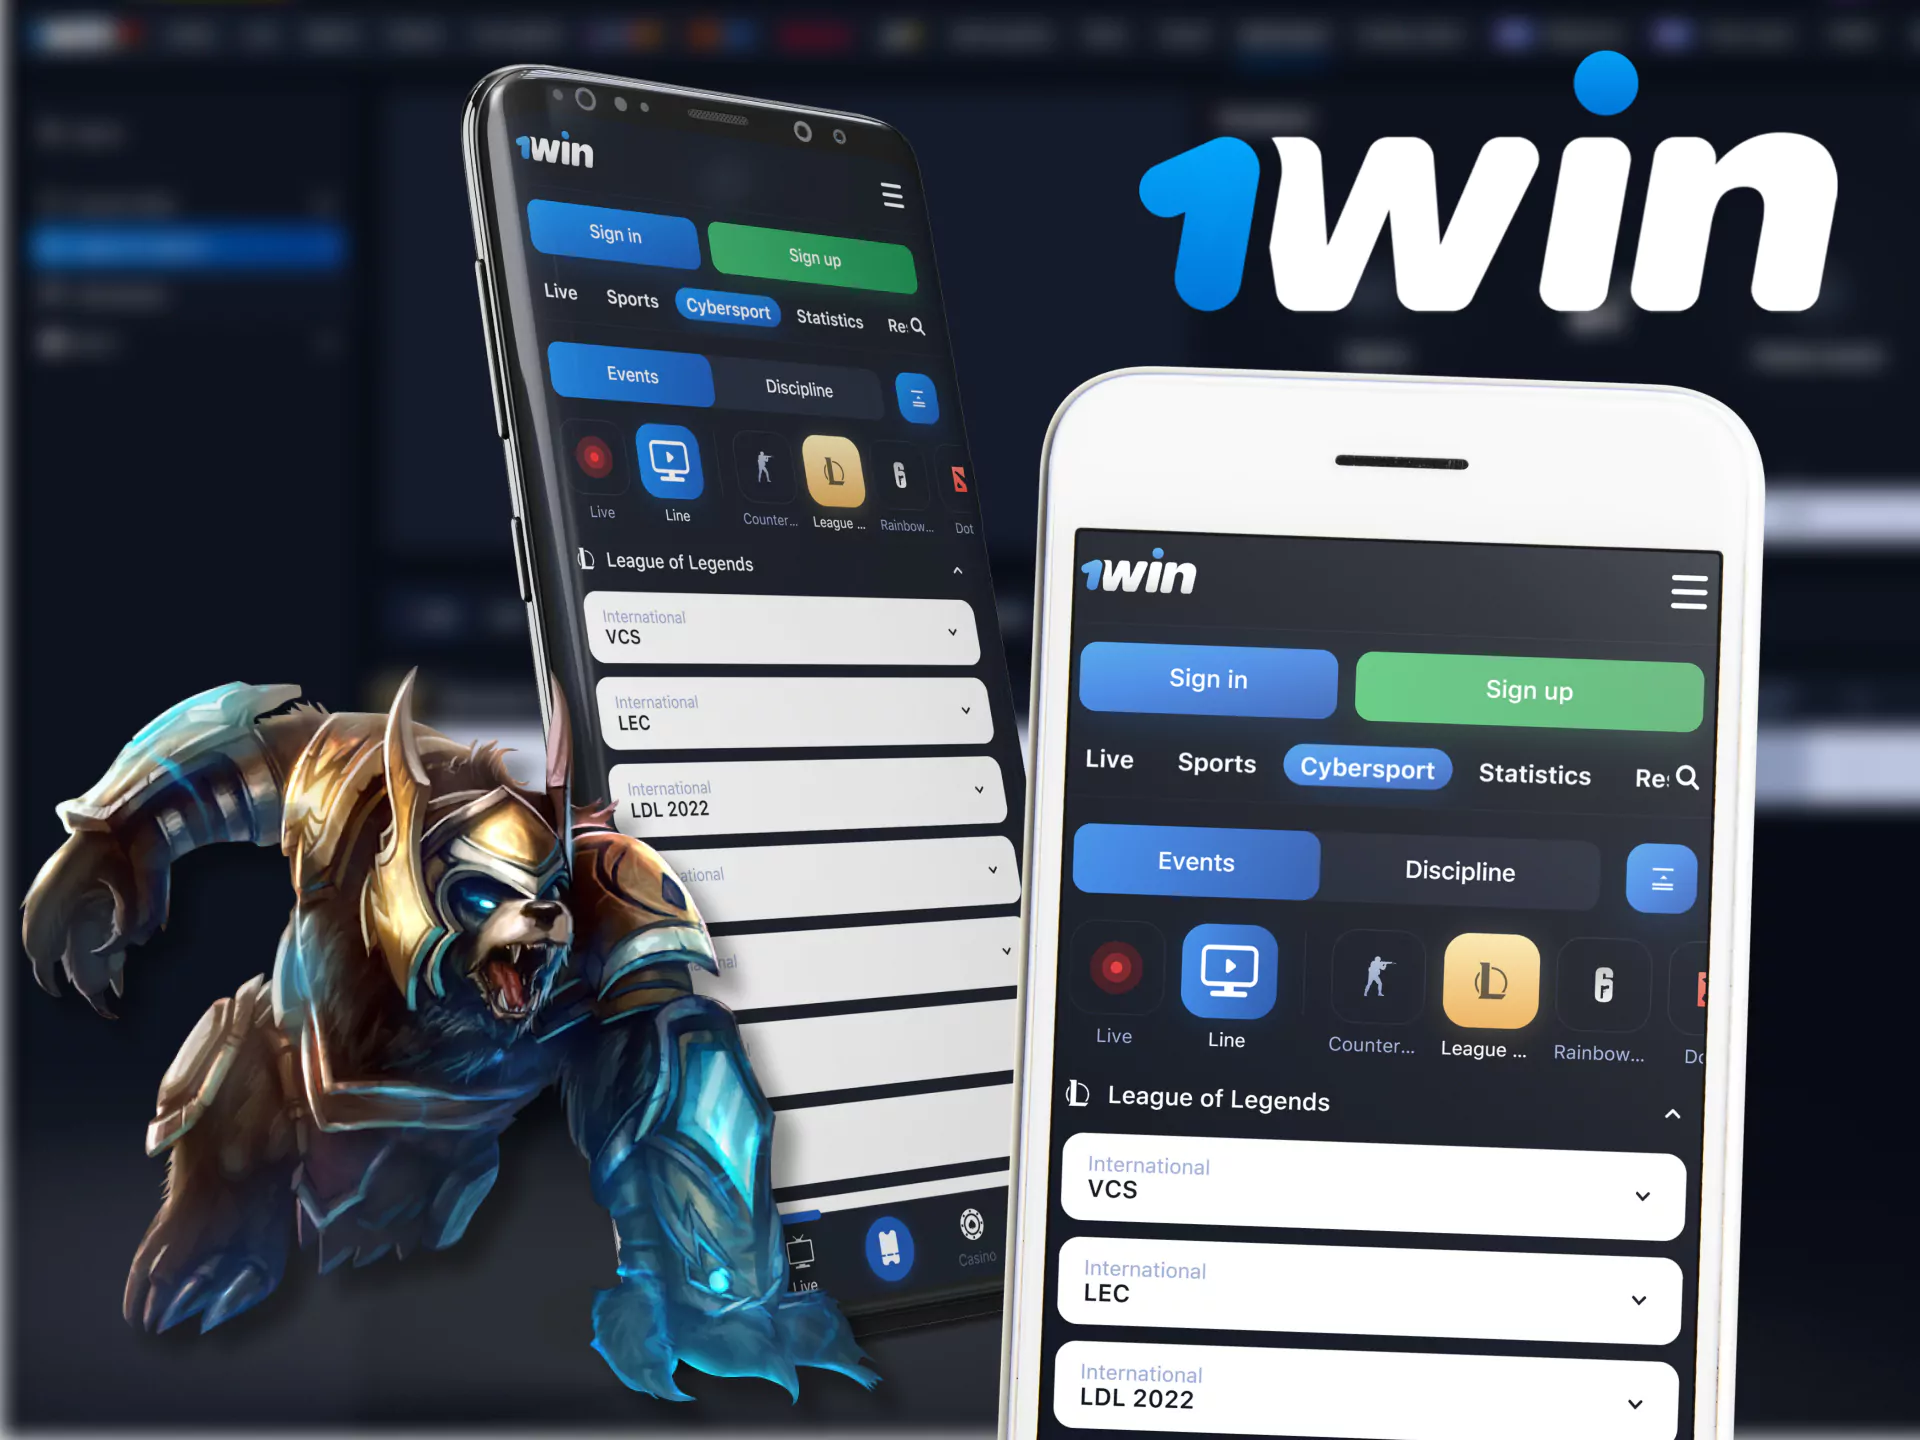 At 1Win you can bet on the League of Legends from your phone using the special app.